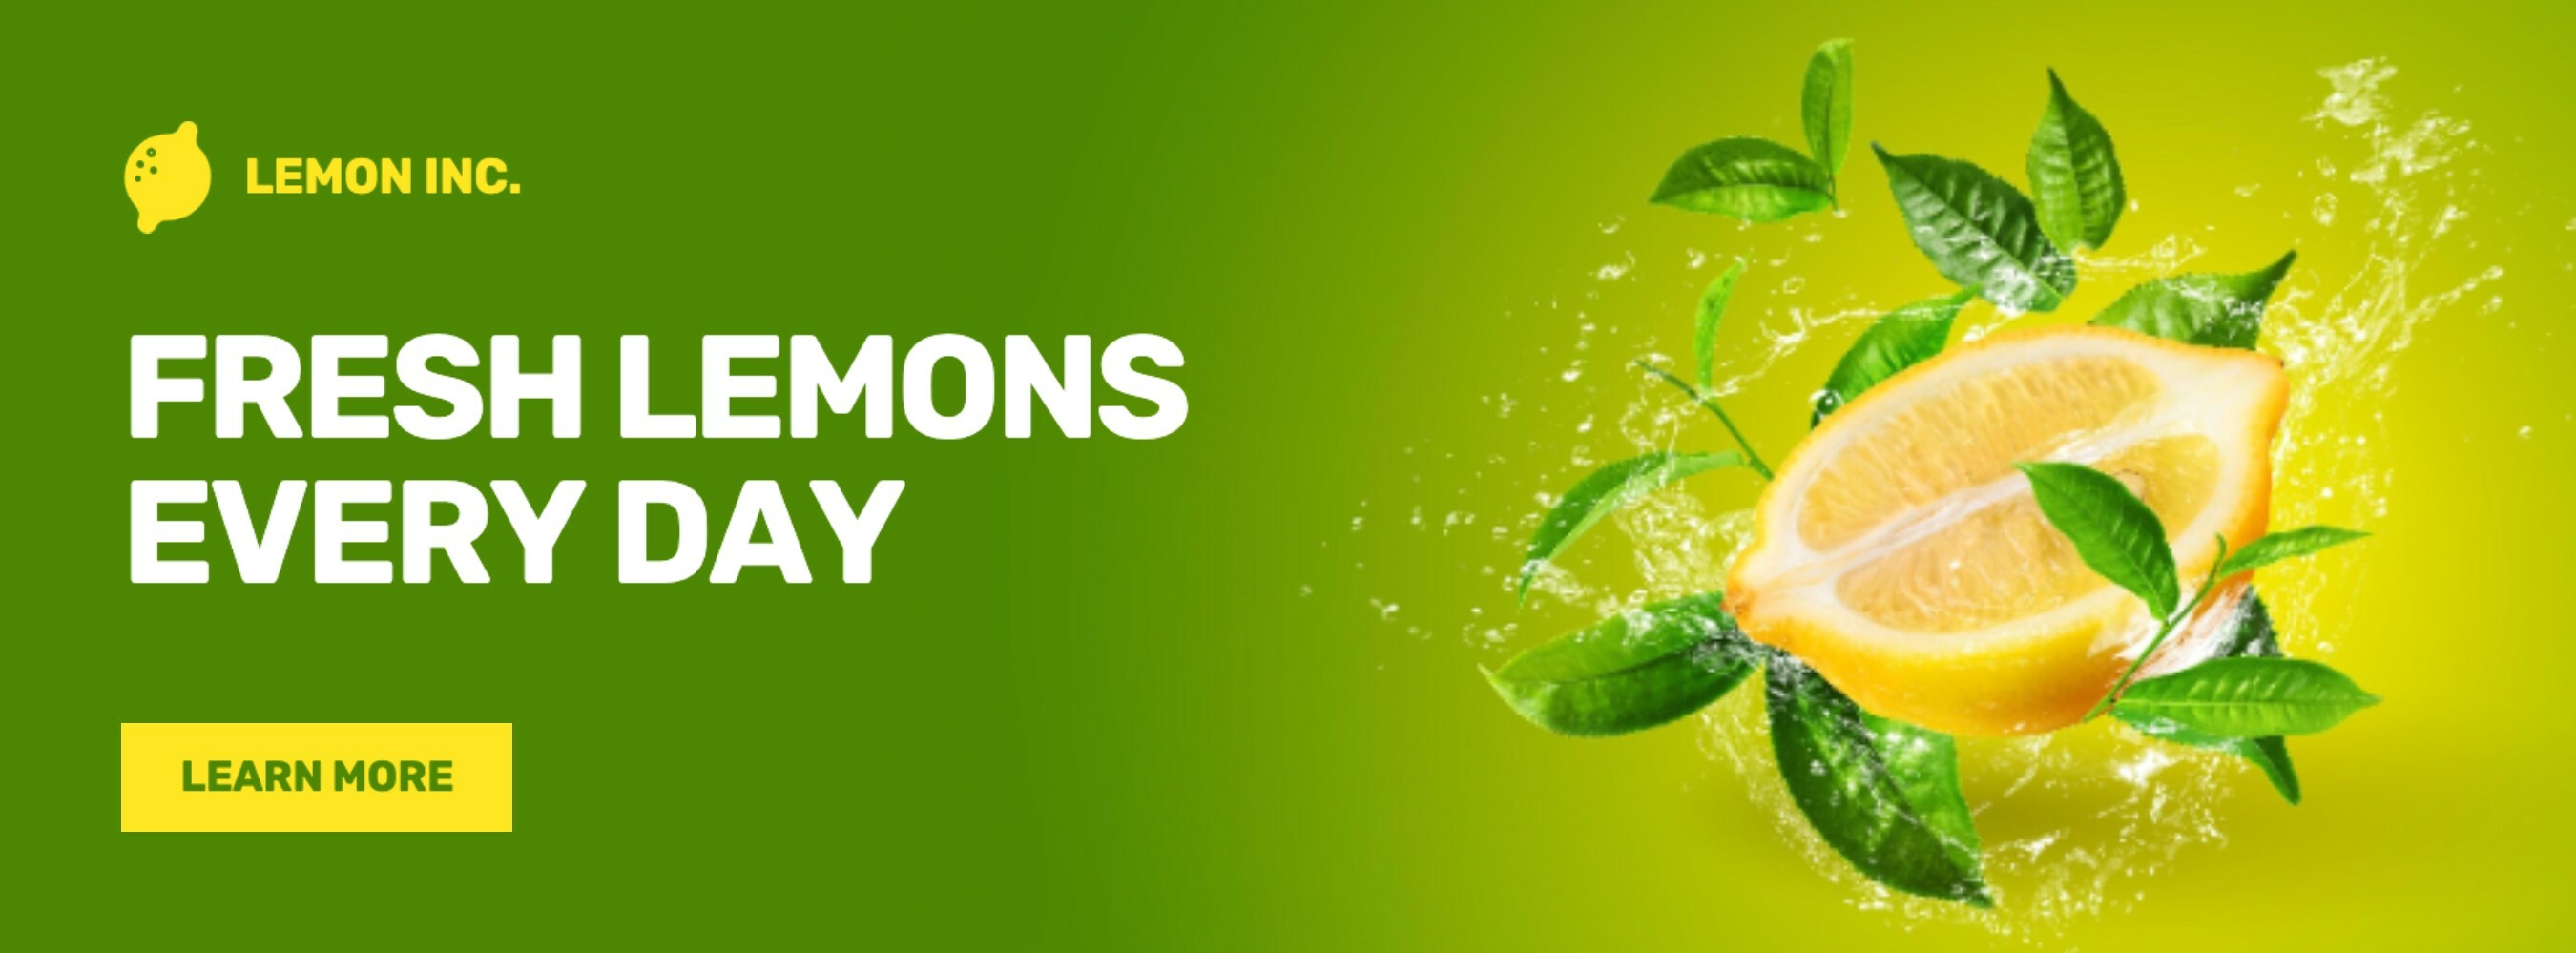 Simple organic product Facebook cover